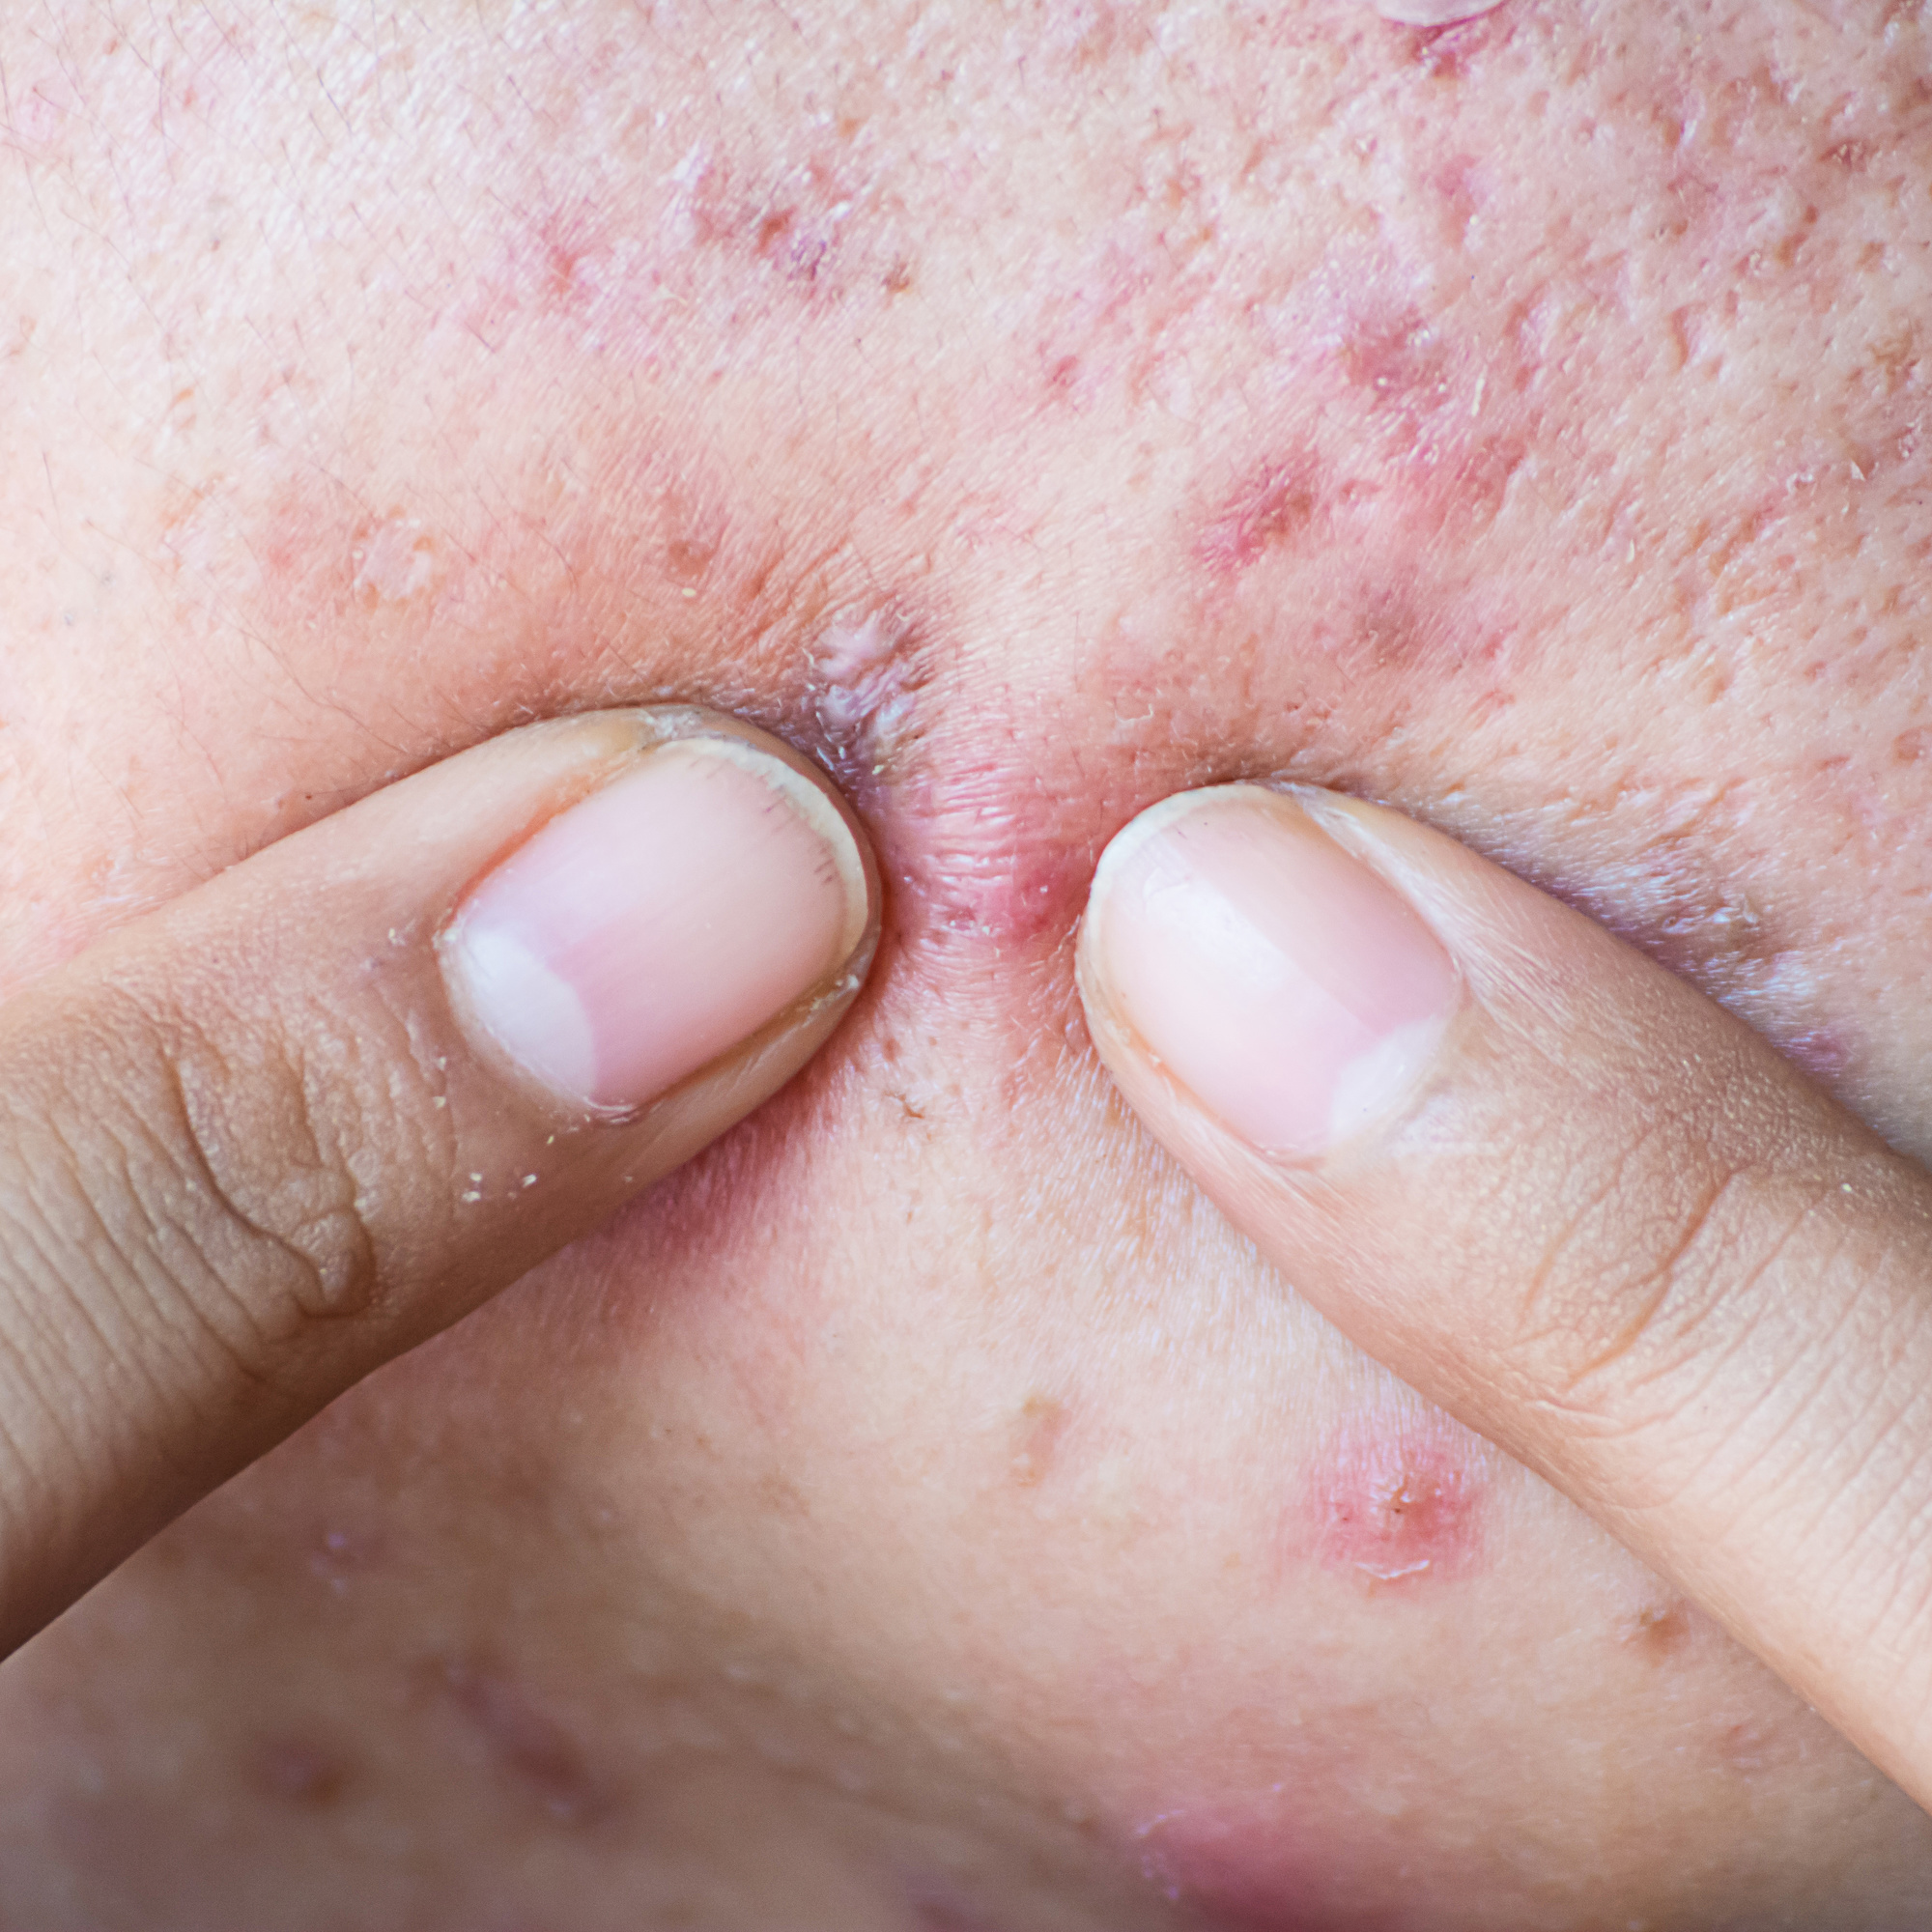 Top 4 Treatments for Your Cystic Acne